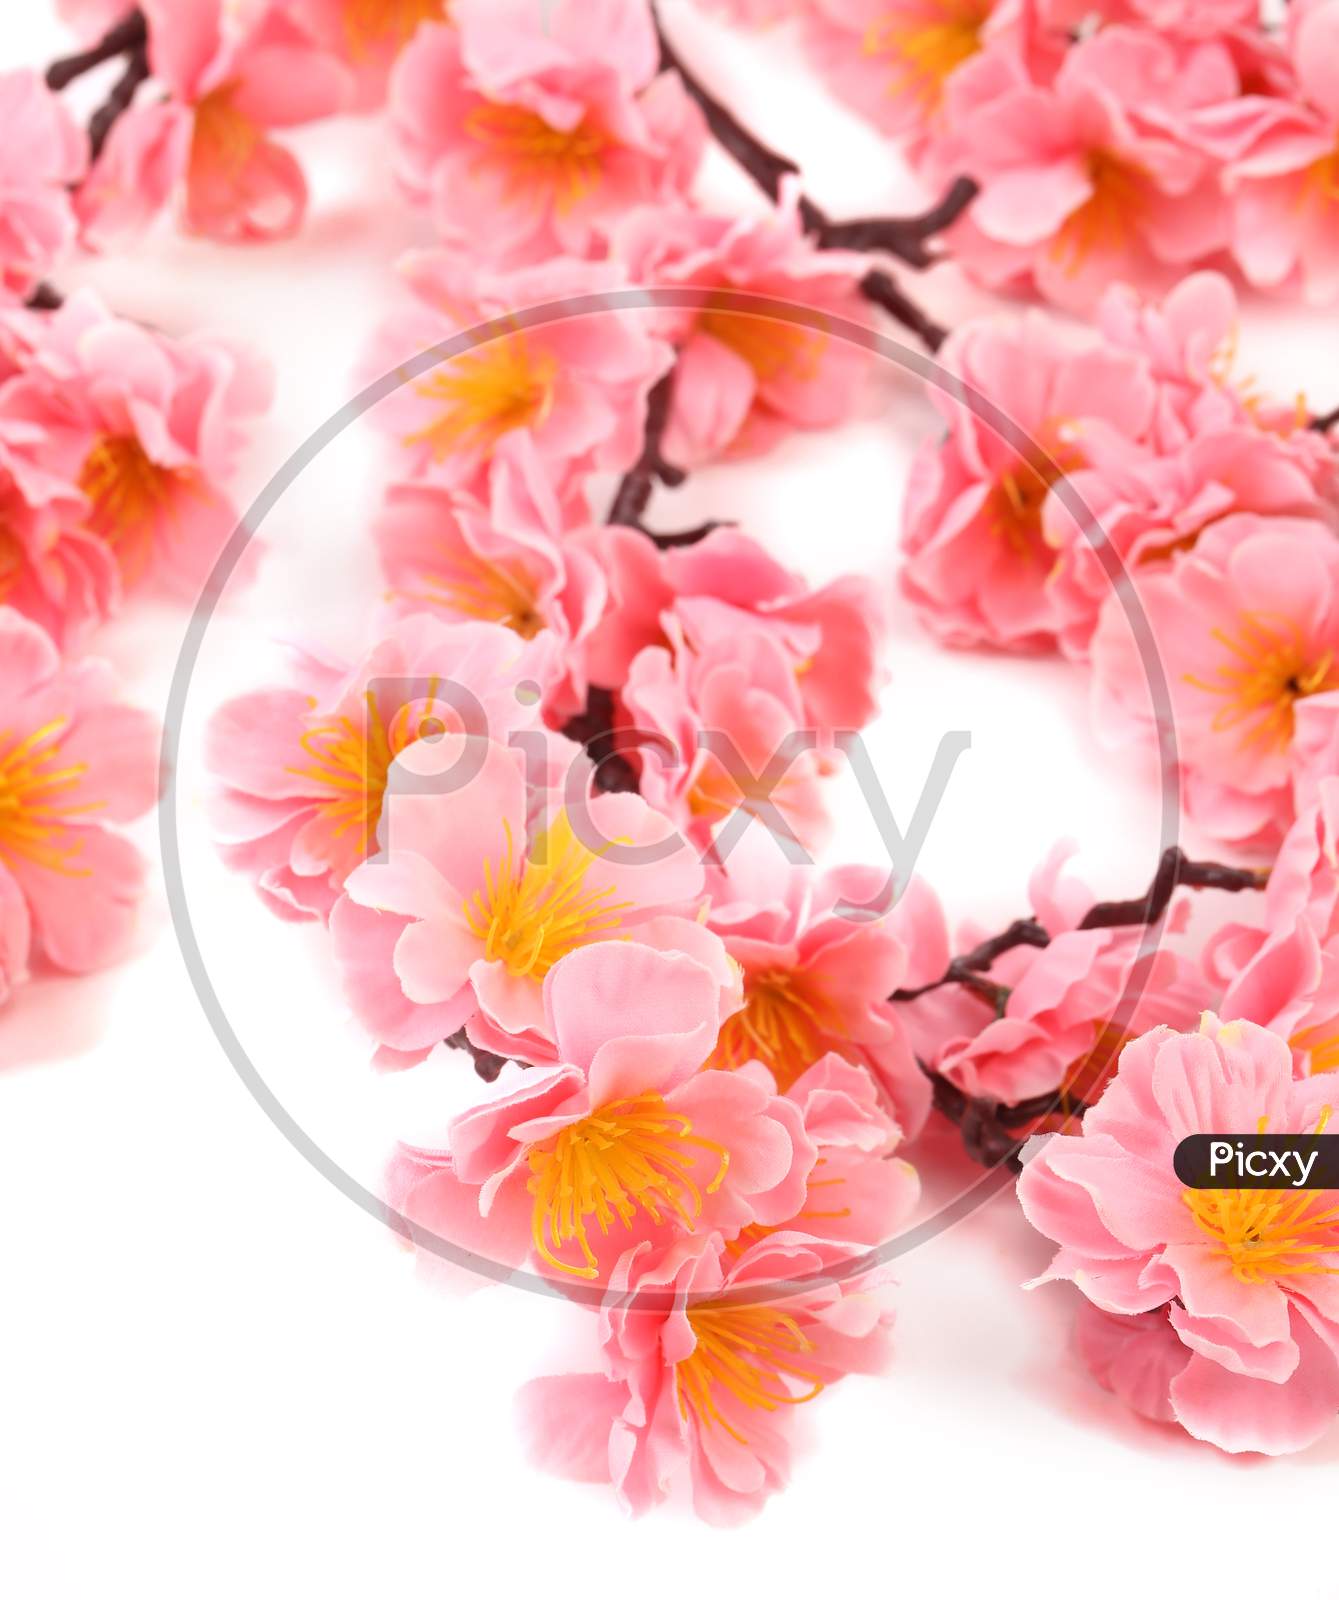 Close Up Of Pink Flowers. Whole Background.